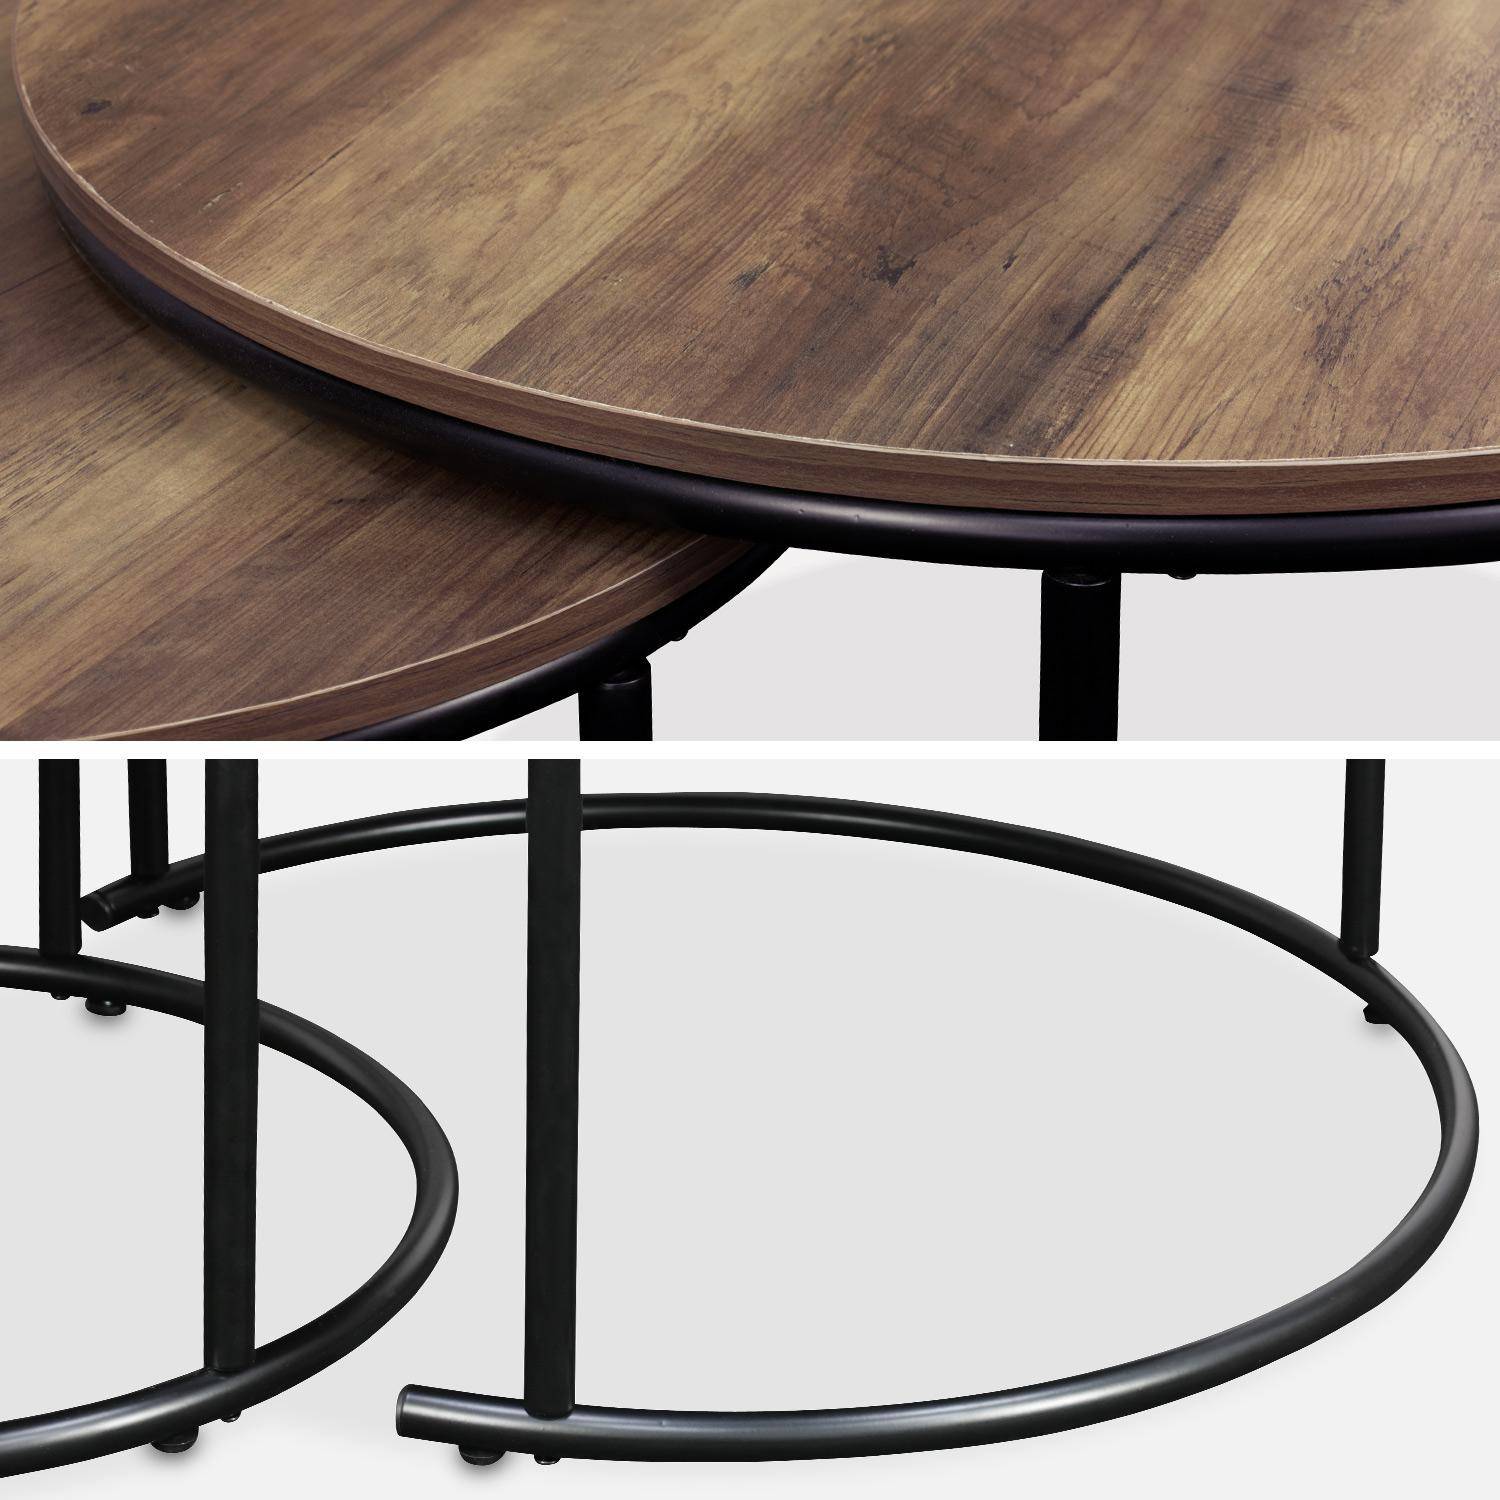 Pair of round, metal and wood-effect nesting coffee tables, 77x40x57cm - Loft,sweeek,Photo7